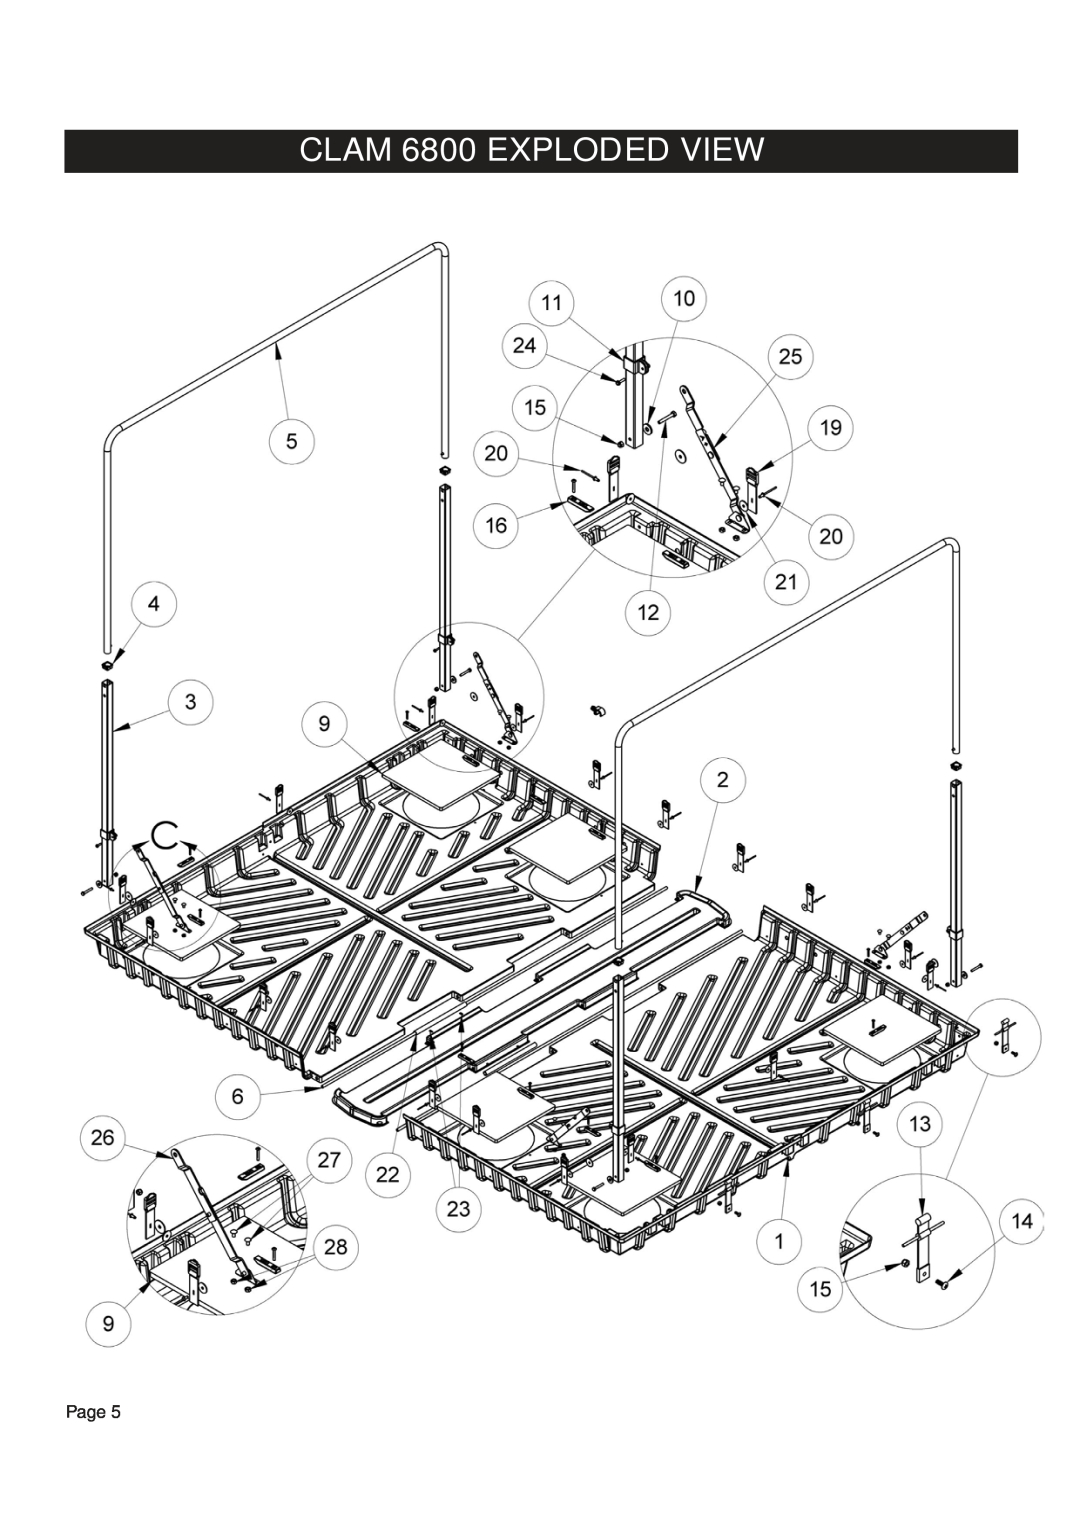 Clam Corp 8202 manual CLAM 6800 EXPLODED VIEW, Page 